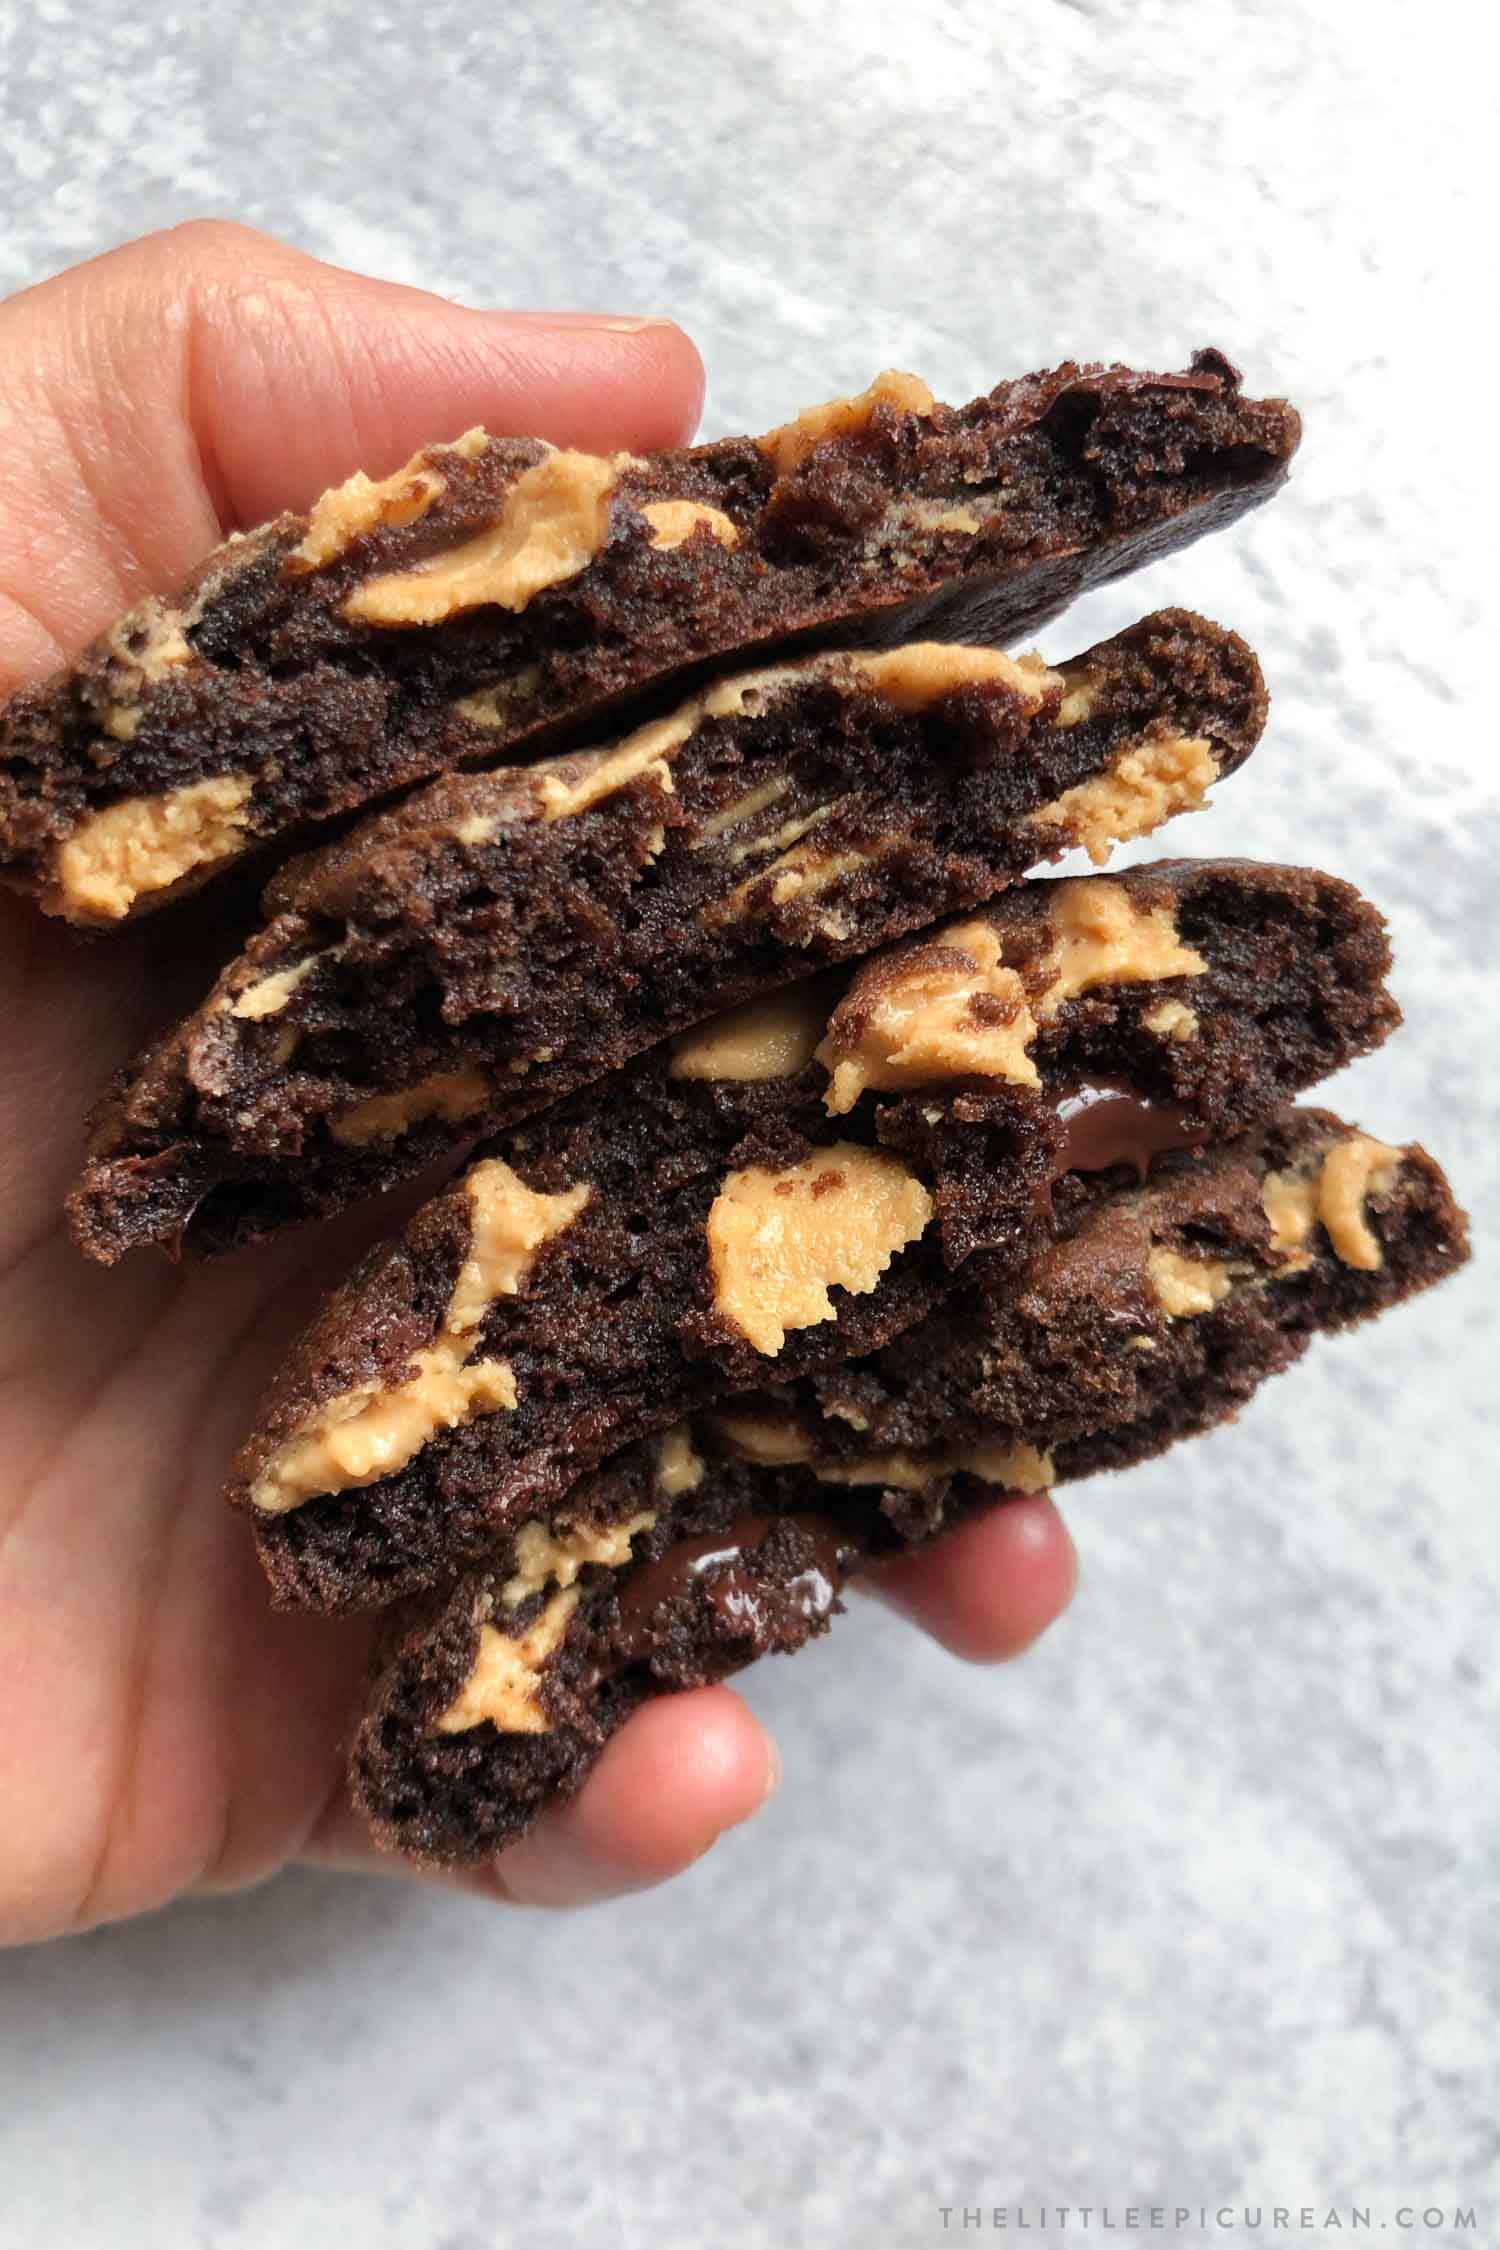 Chocolate Peanut Butter Chip Cookies